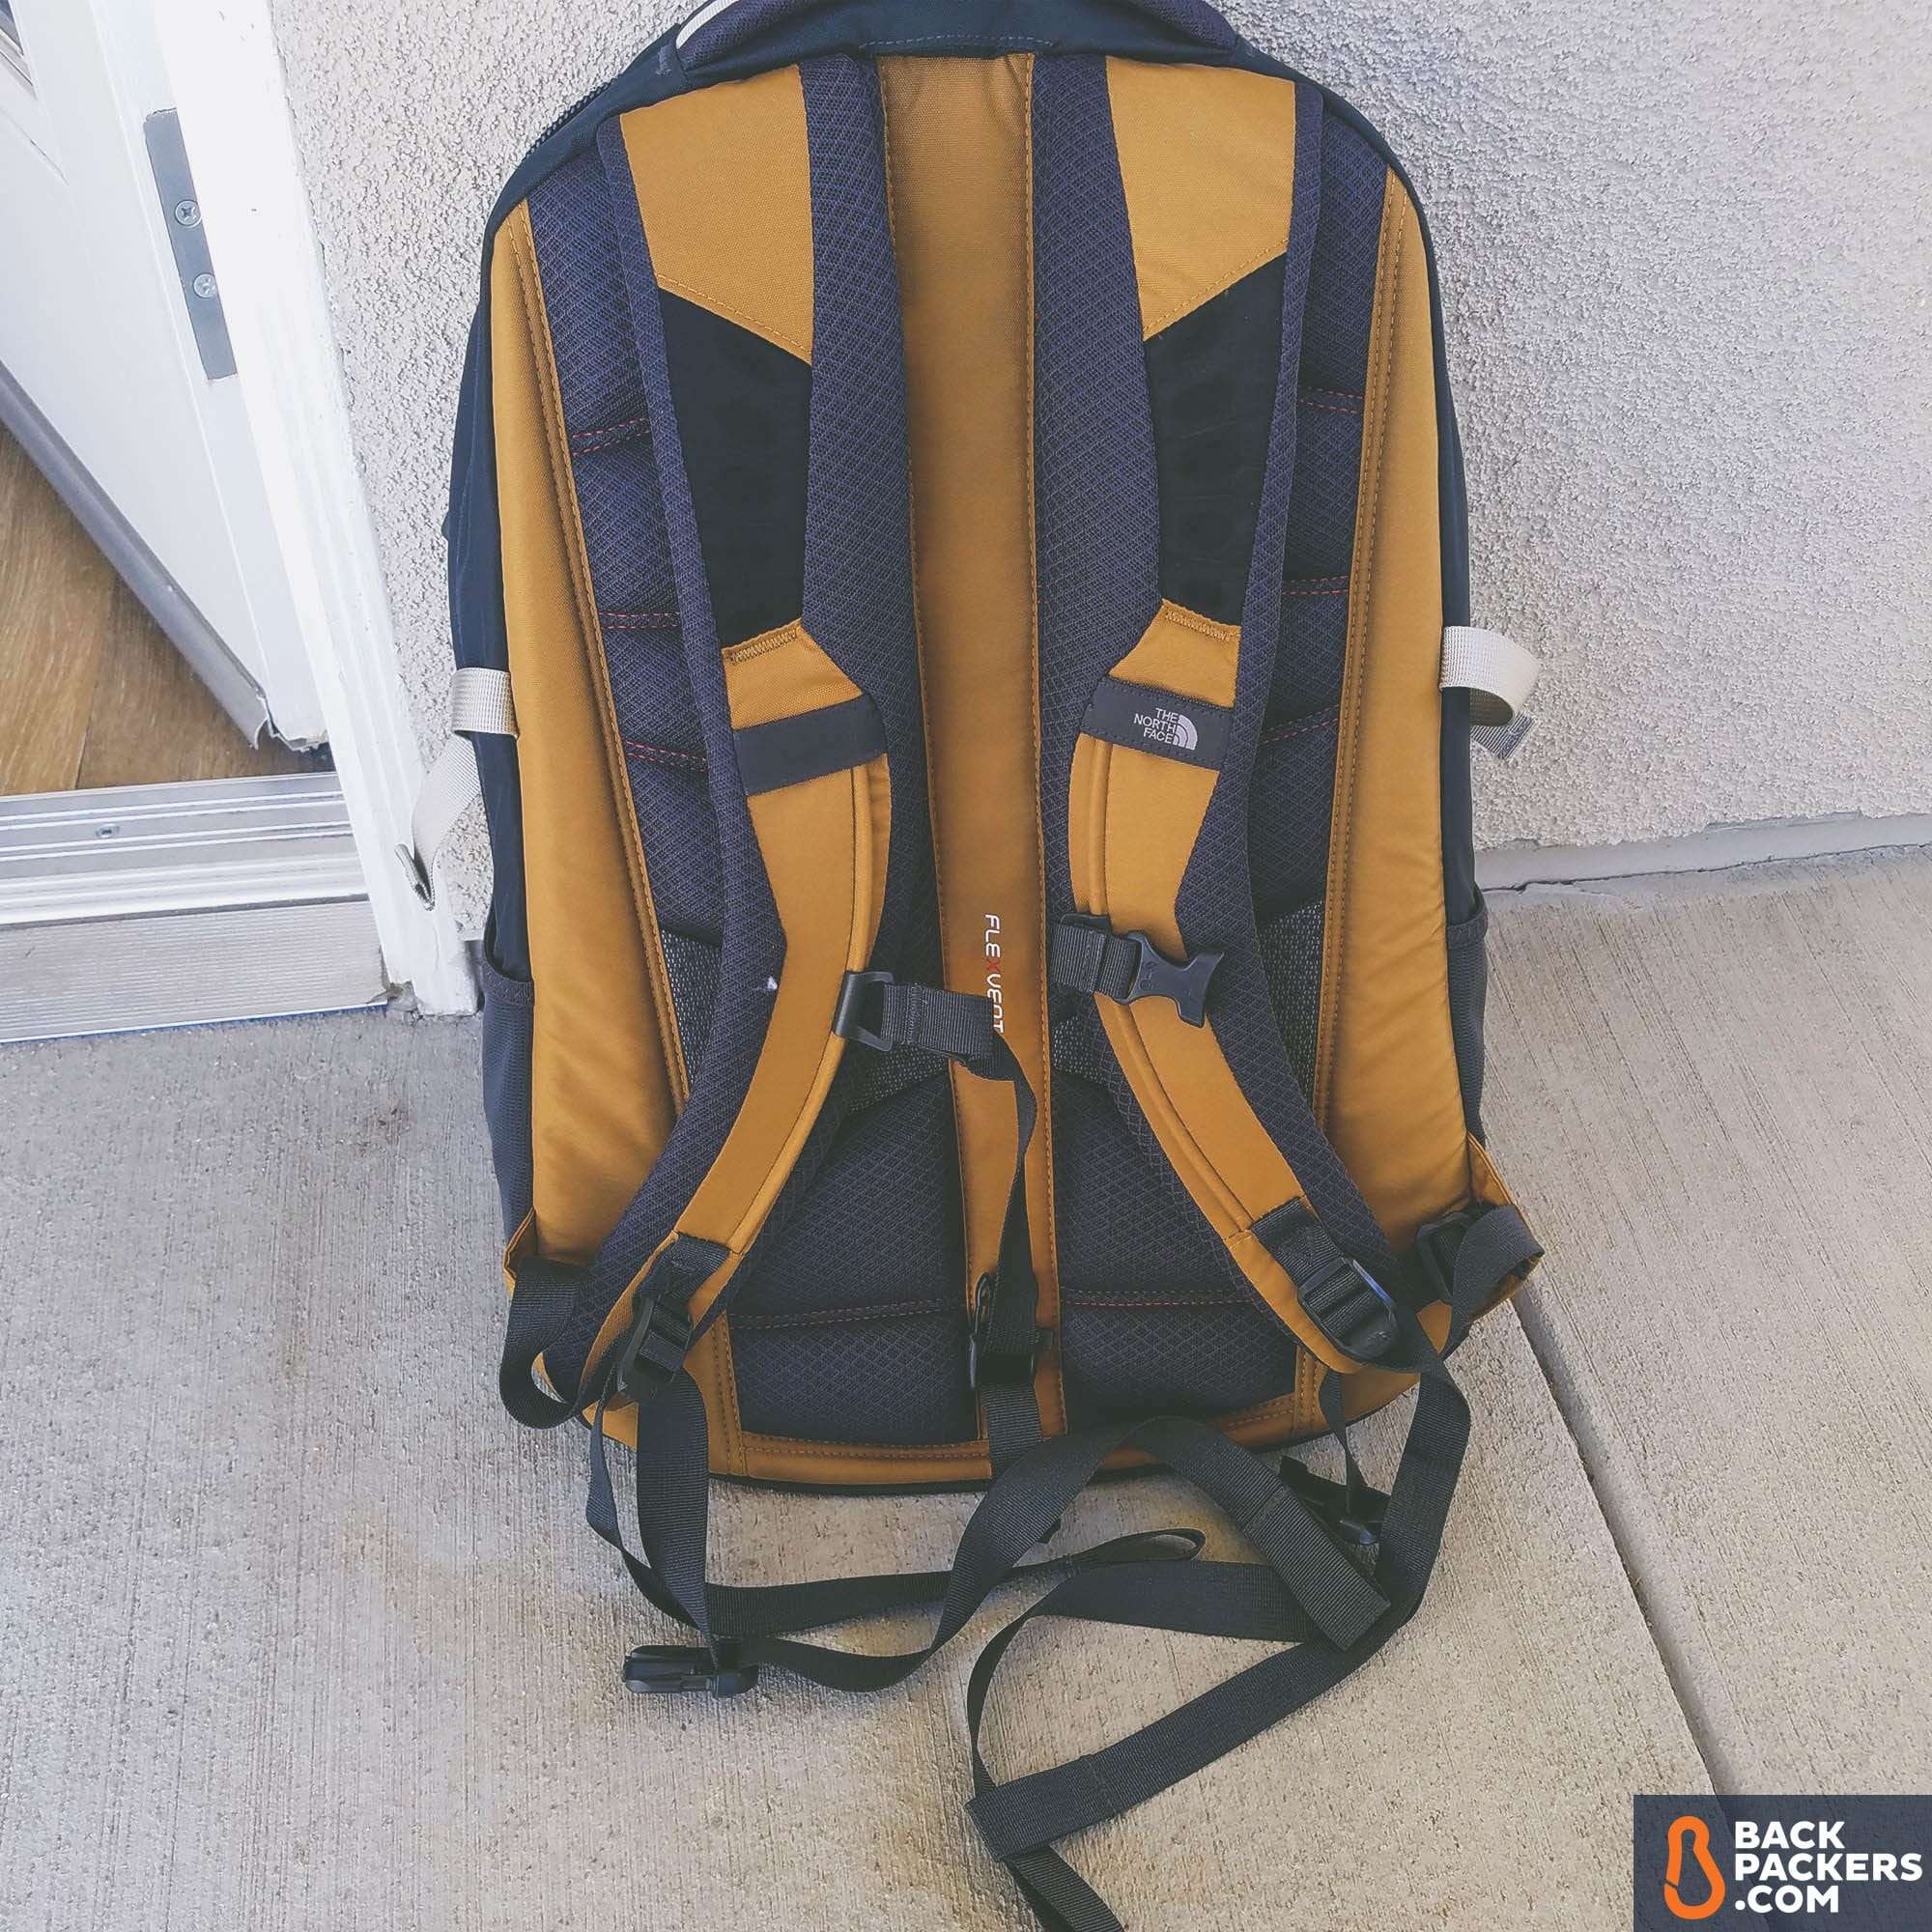 the north face muirs backpack